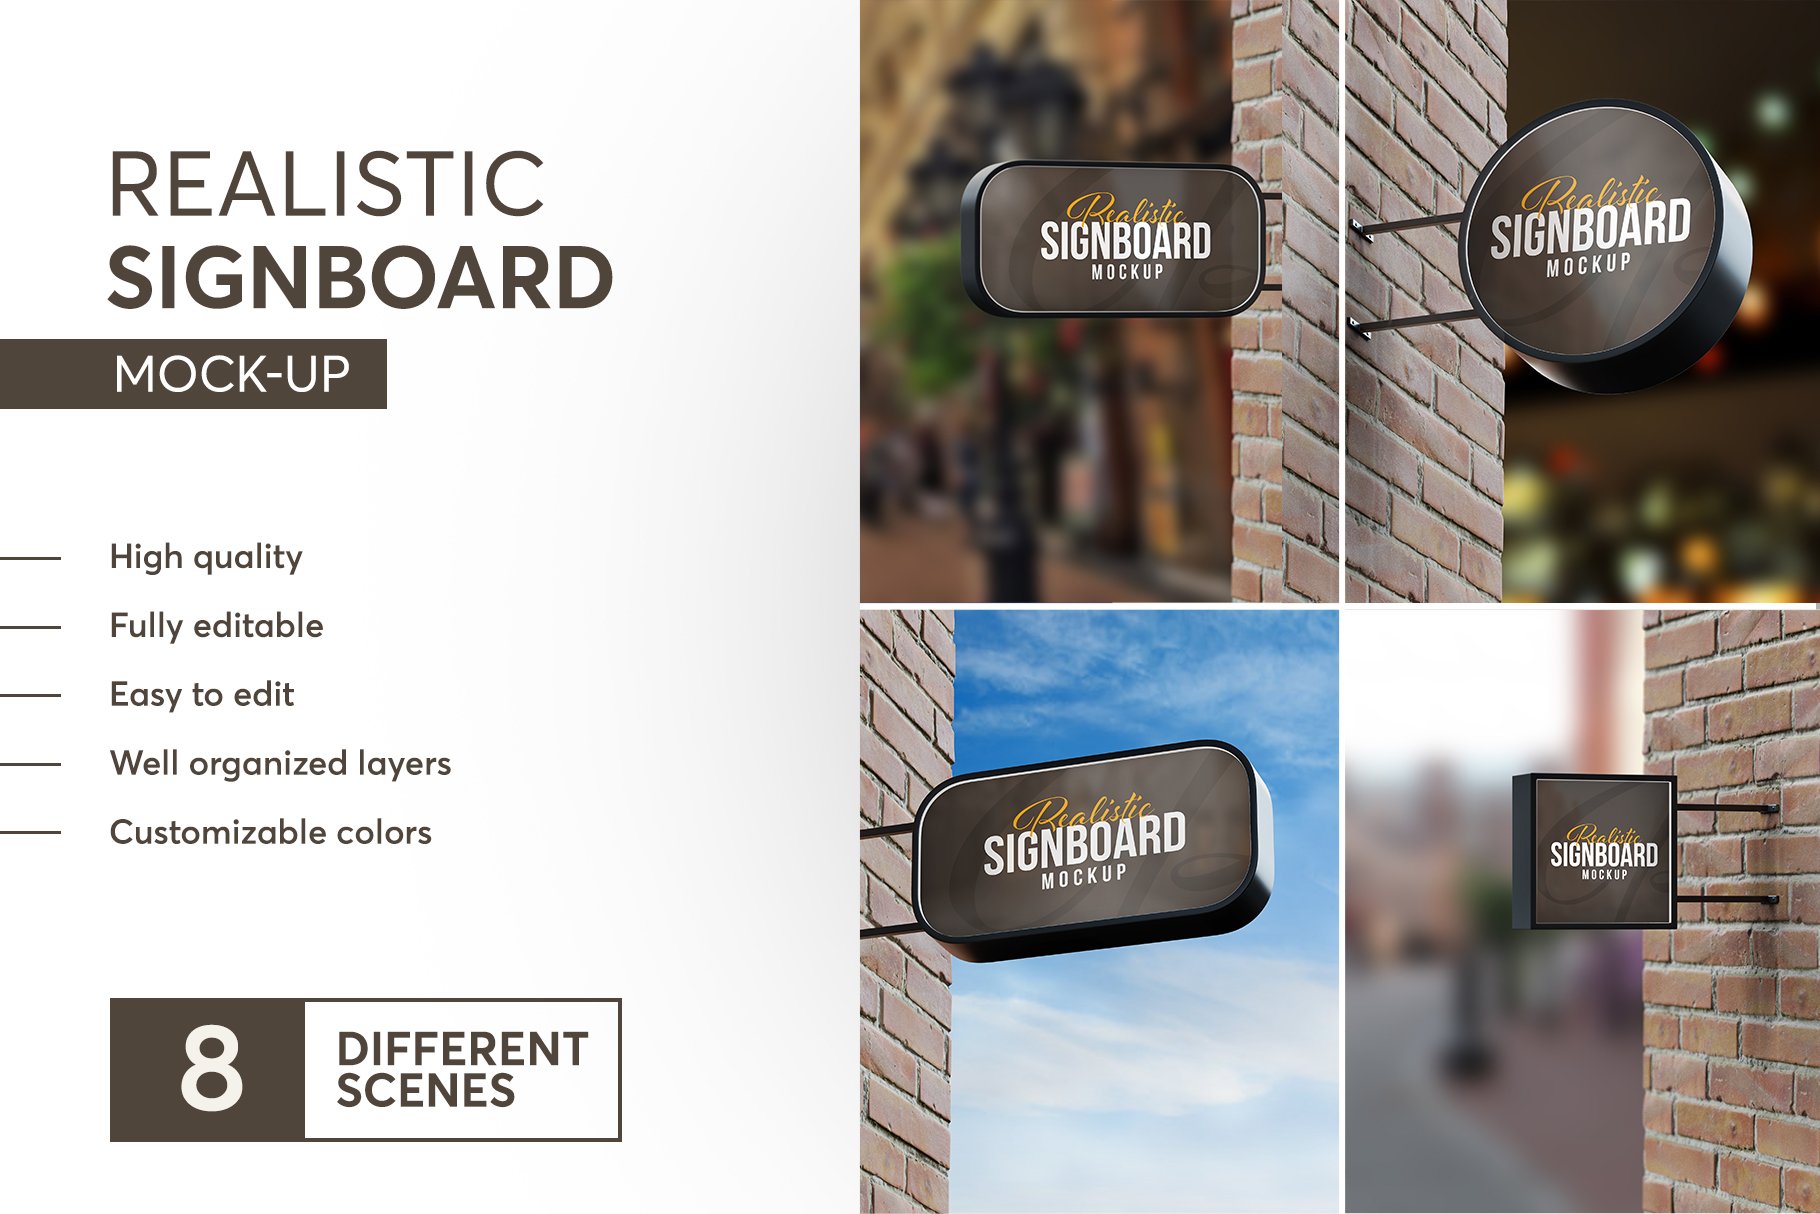 Realistic Signboard Mock-up cover image.